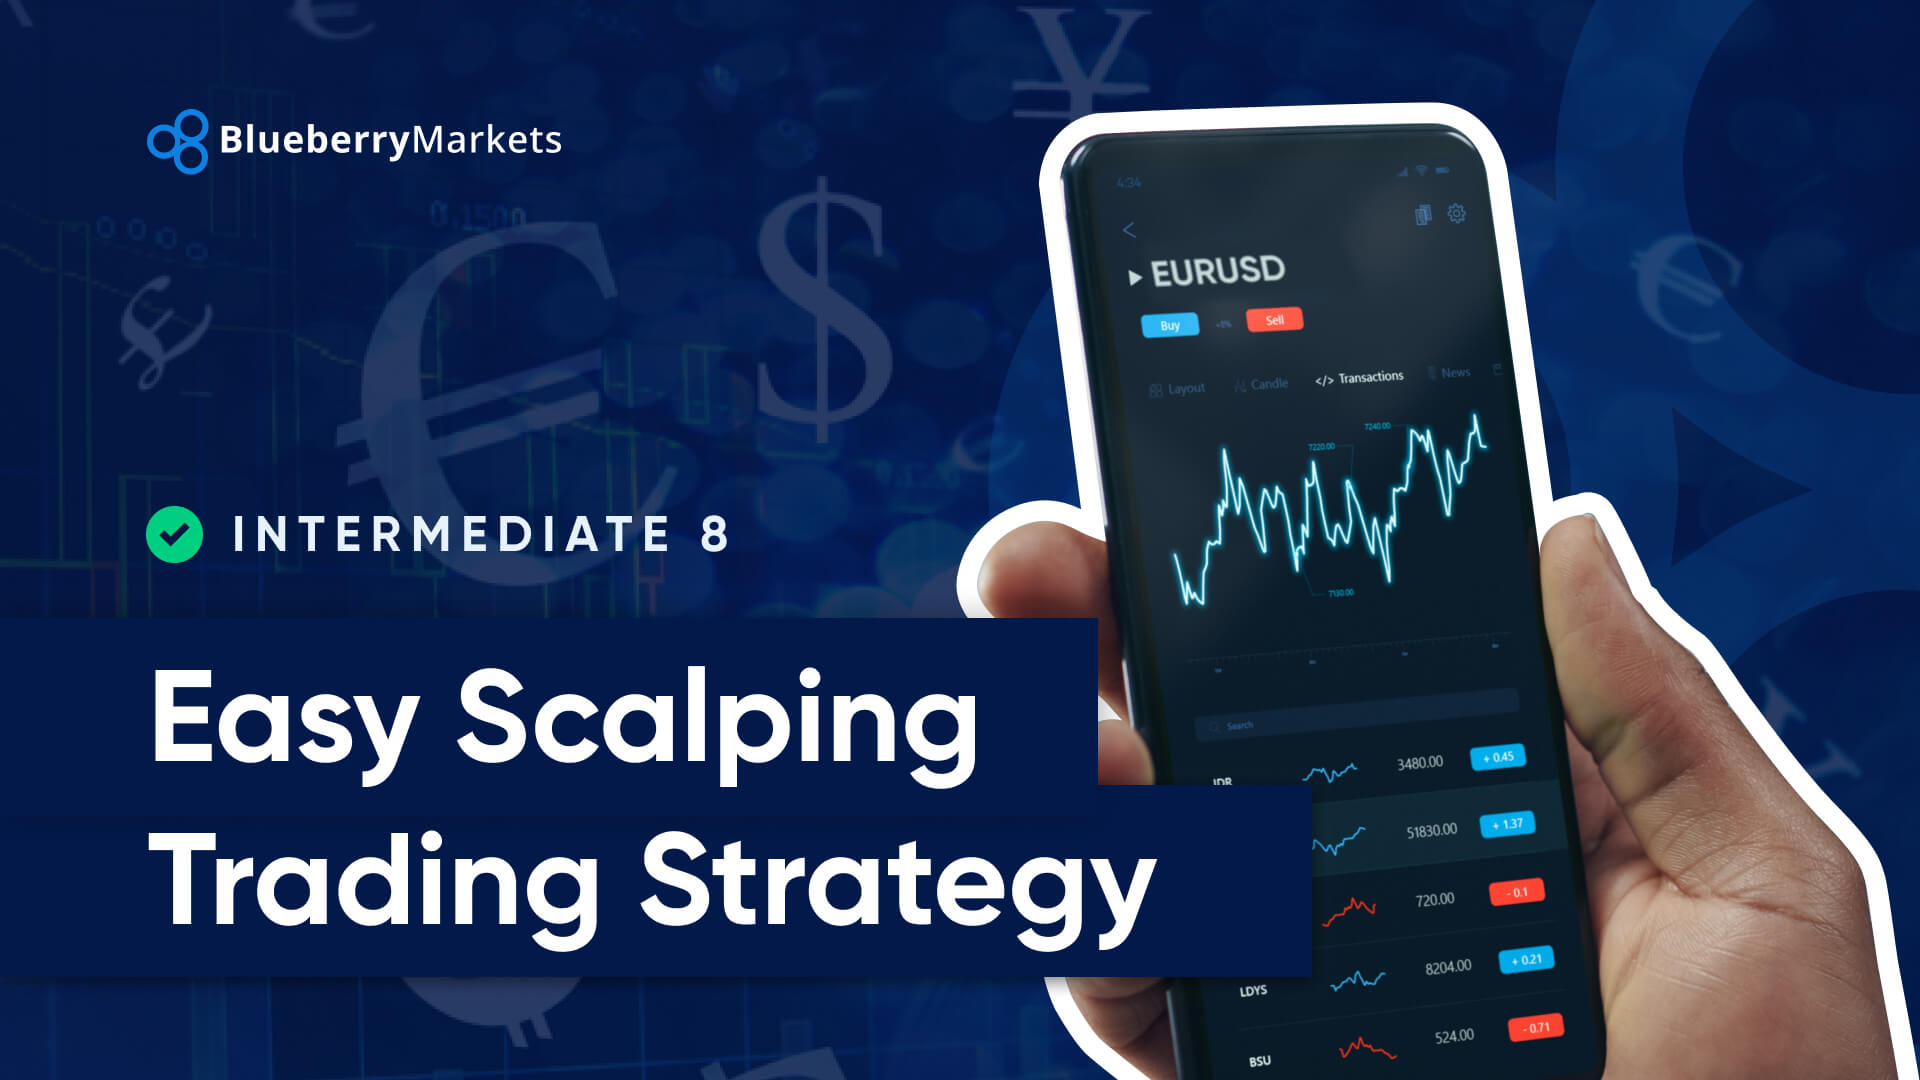 Easy Scalping Trading Strategy